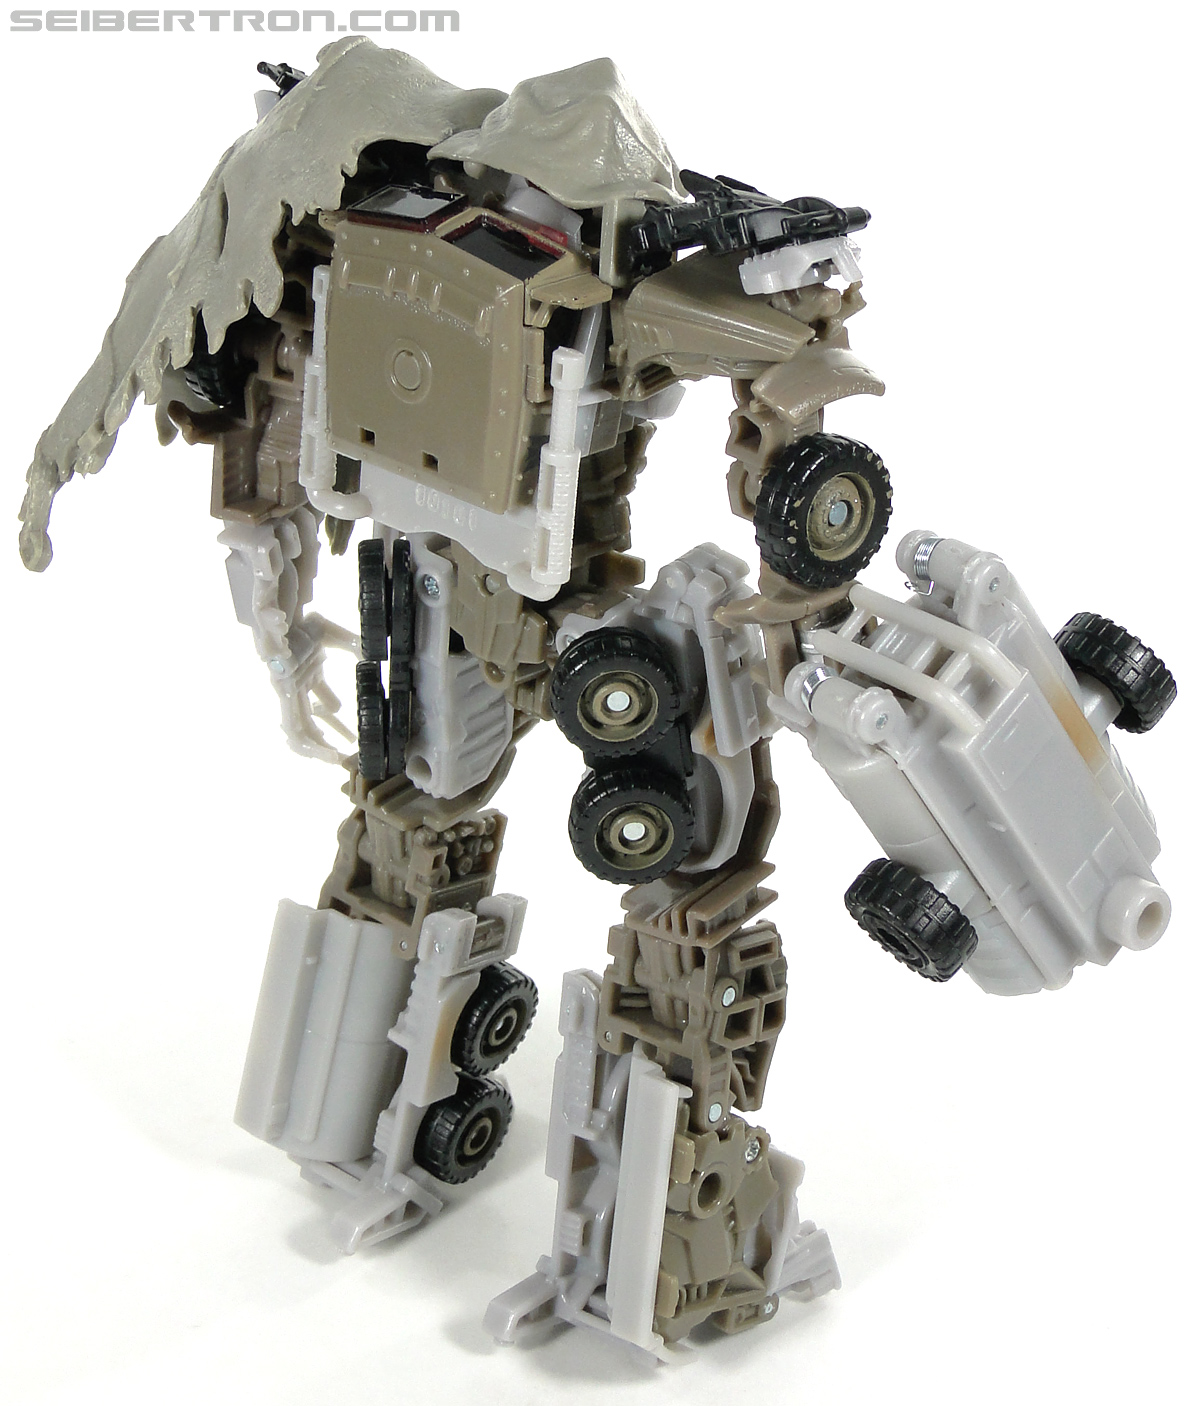 Transformers Dark of the Moon Megatron (Image #84 of 227)